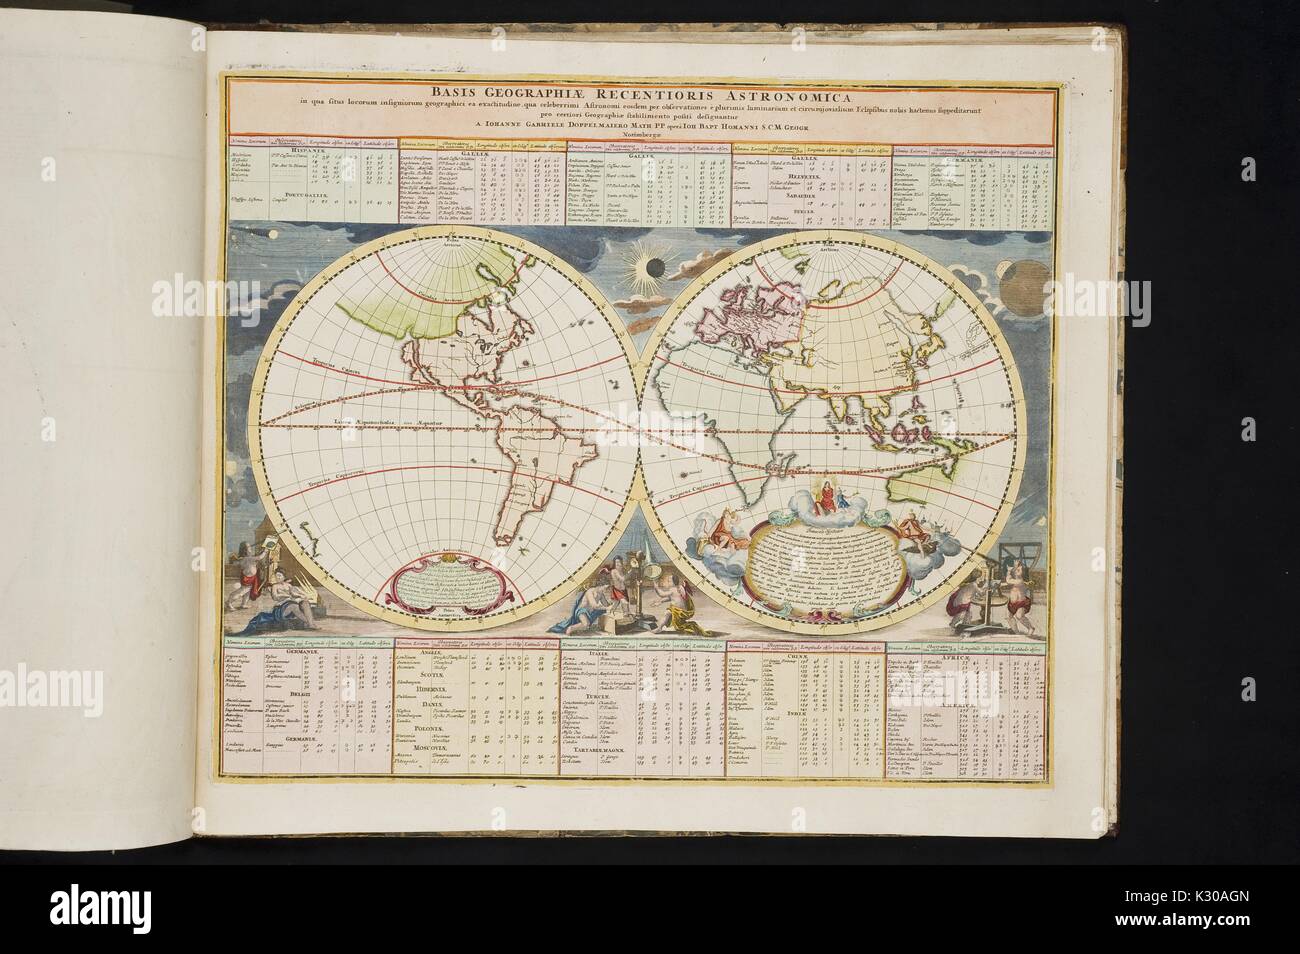 World map in Atlas Coelestis by Johann Gabriel Doppelmayr, in the Dr. Elliott and Eileen Hinkes Collection of Rare Books of Scientific Discovery housed in the Sheridan Libraries of Johns Hopkins University, 2010. Stock Photo